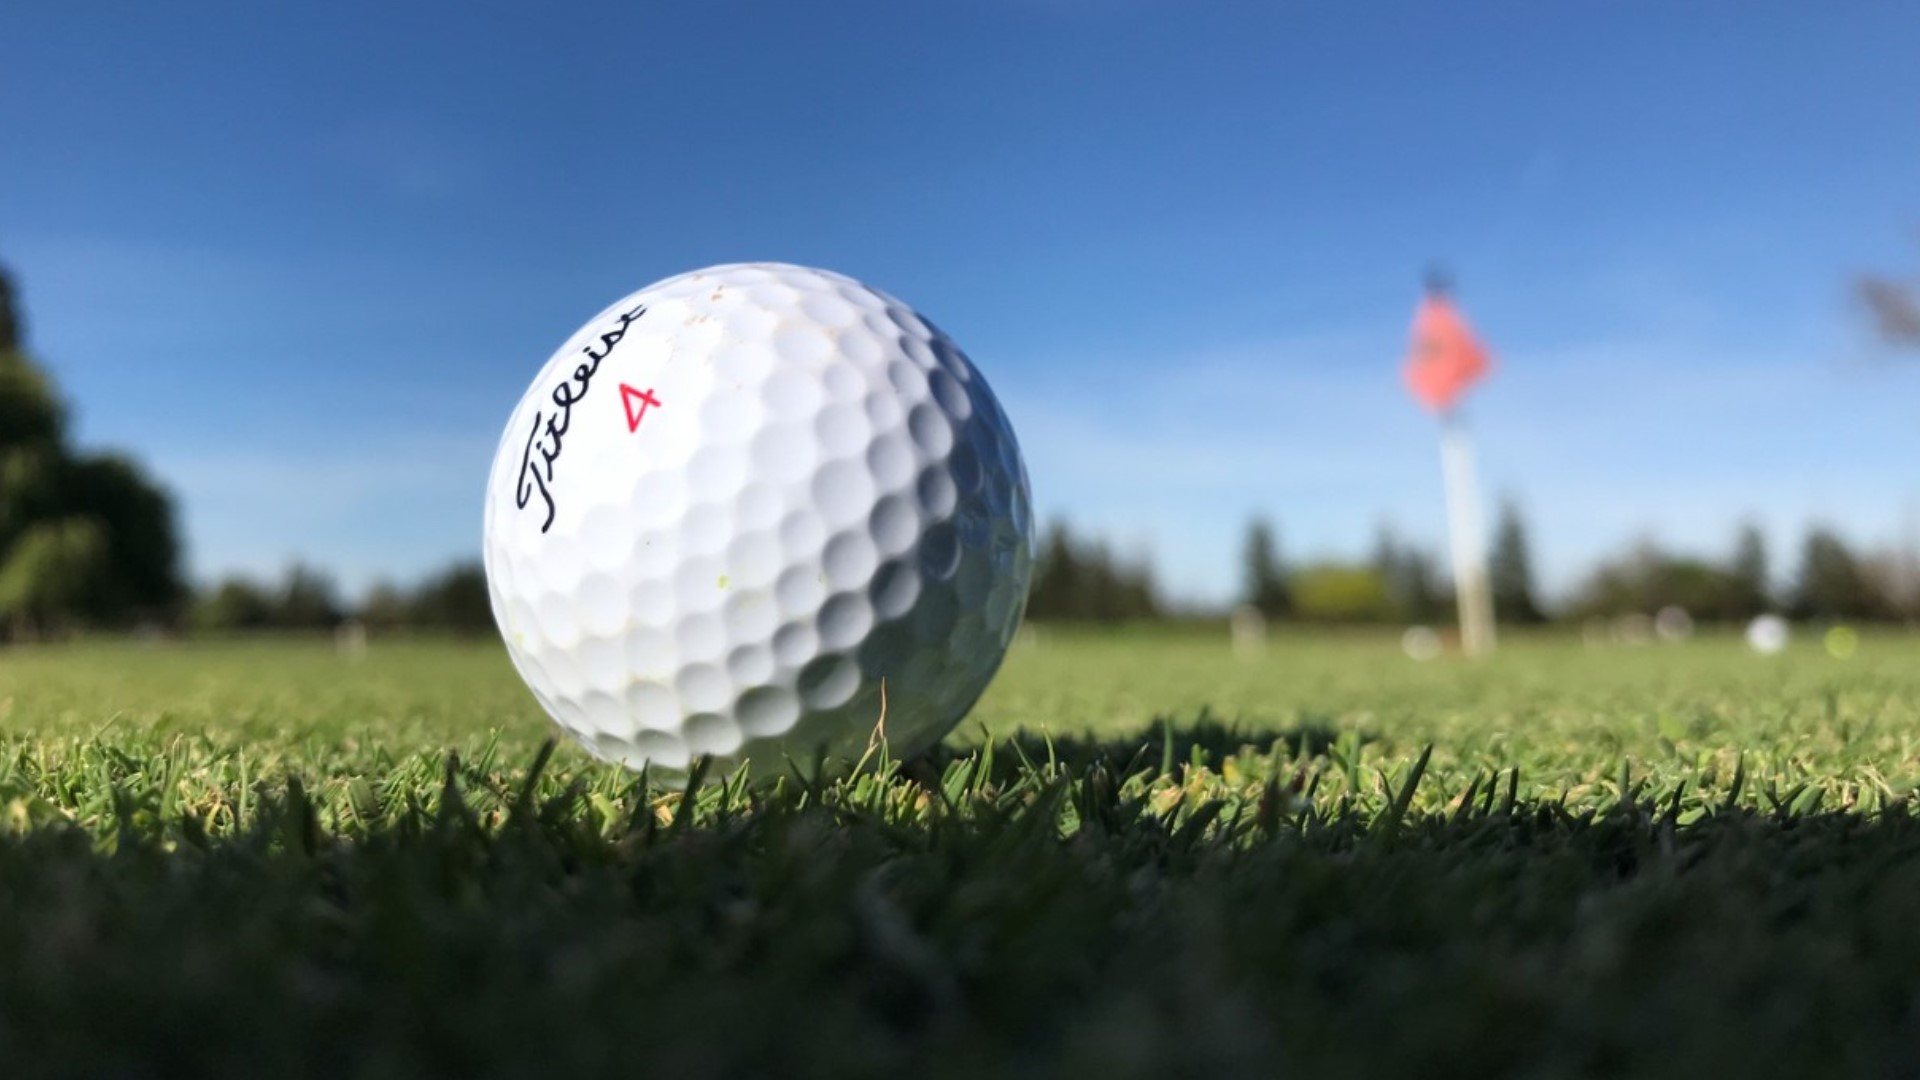 The future of Cordova Golf Course is uncertain, as the body that owns and governs it – the Cordova Recreation and Park District – weighs its options.